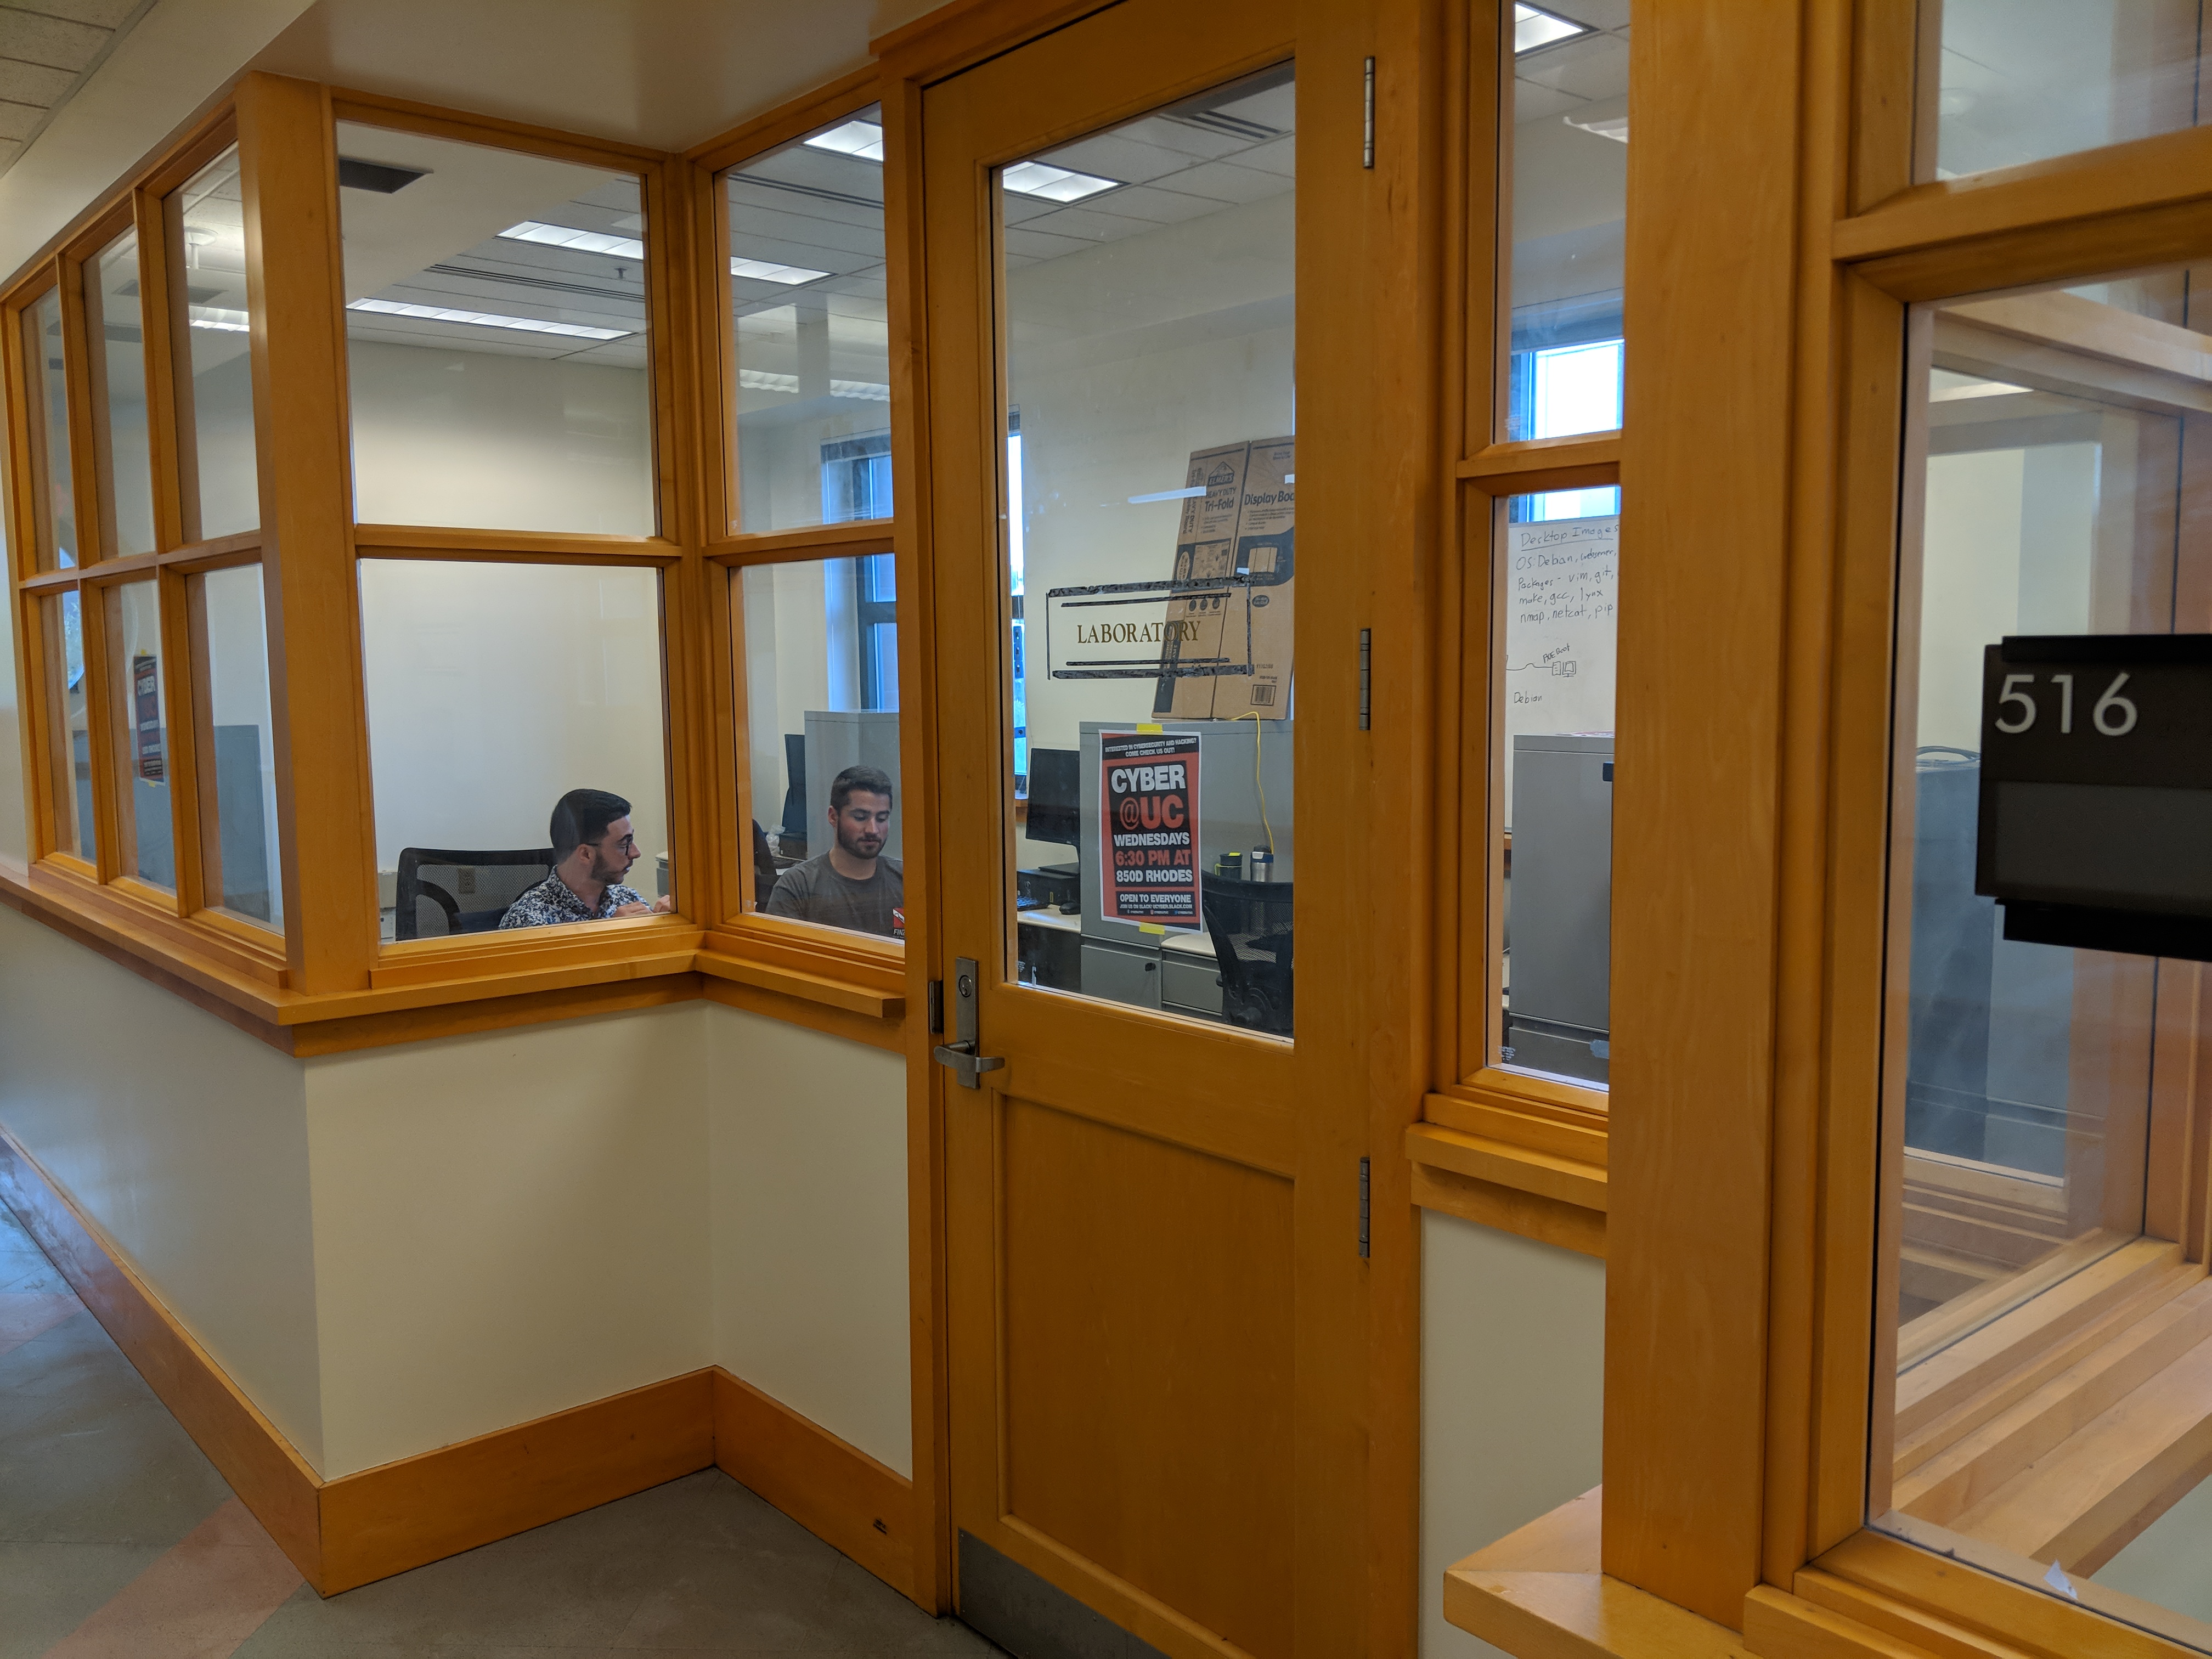 Our lab space in ERC 516